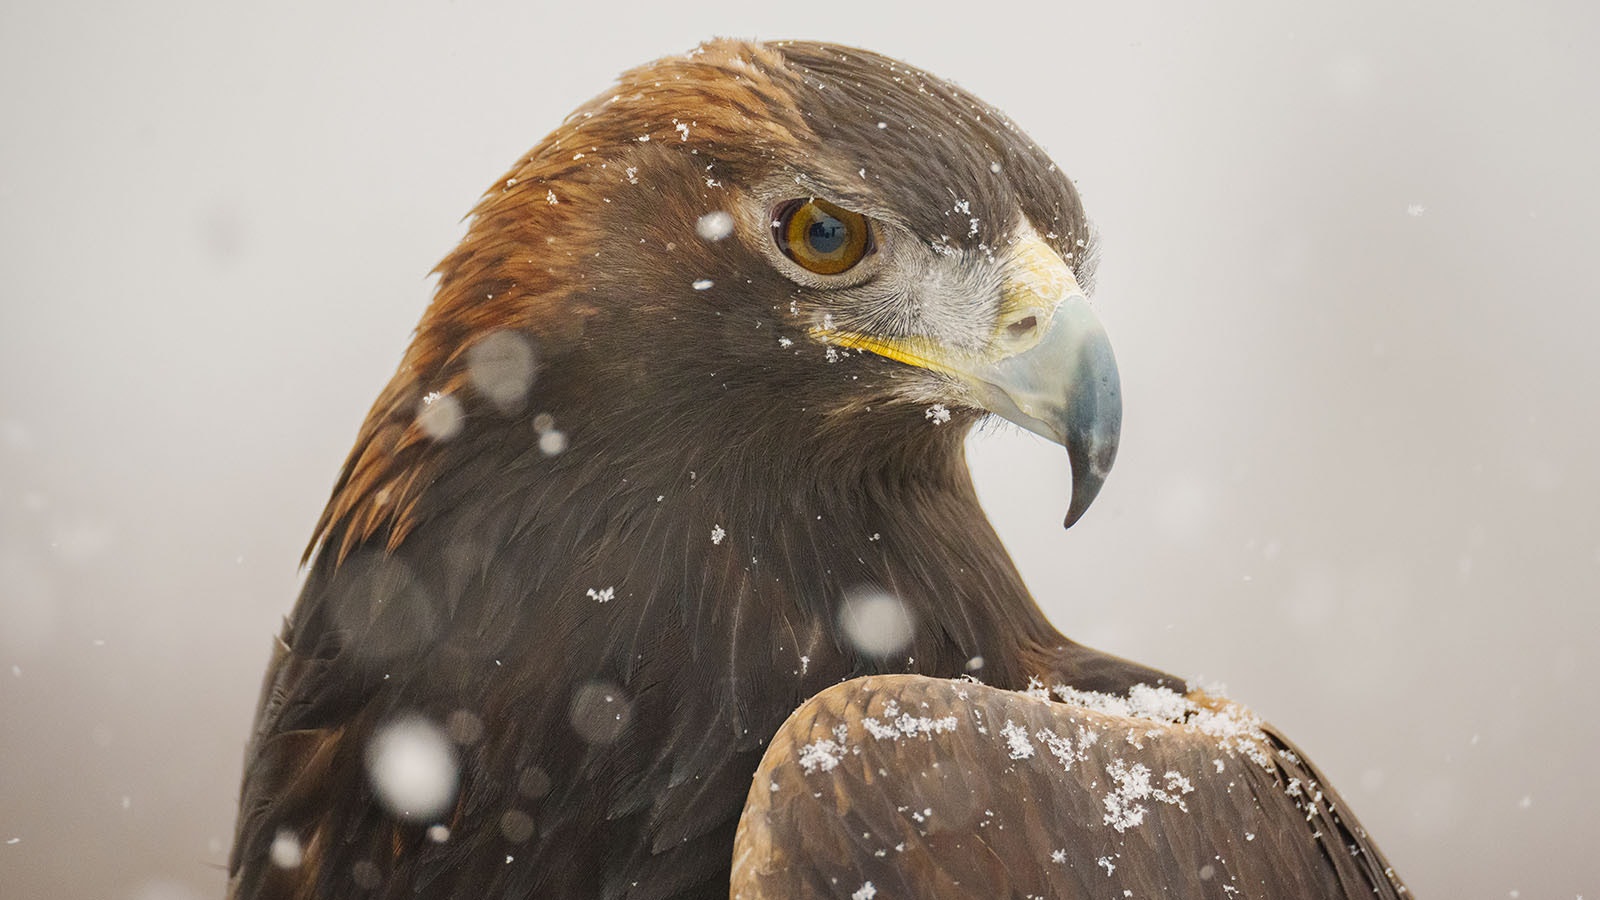 Wyoming has a significant resident population of golden eagles, which doubles during the winter when eagles from Alaska and Canada migrate here.